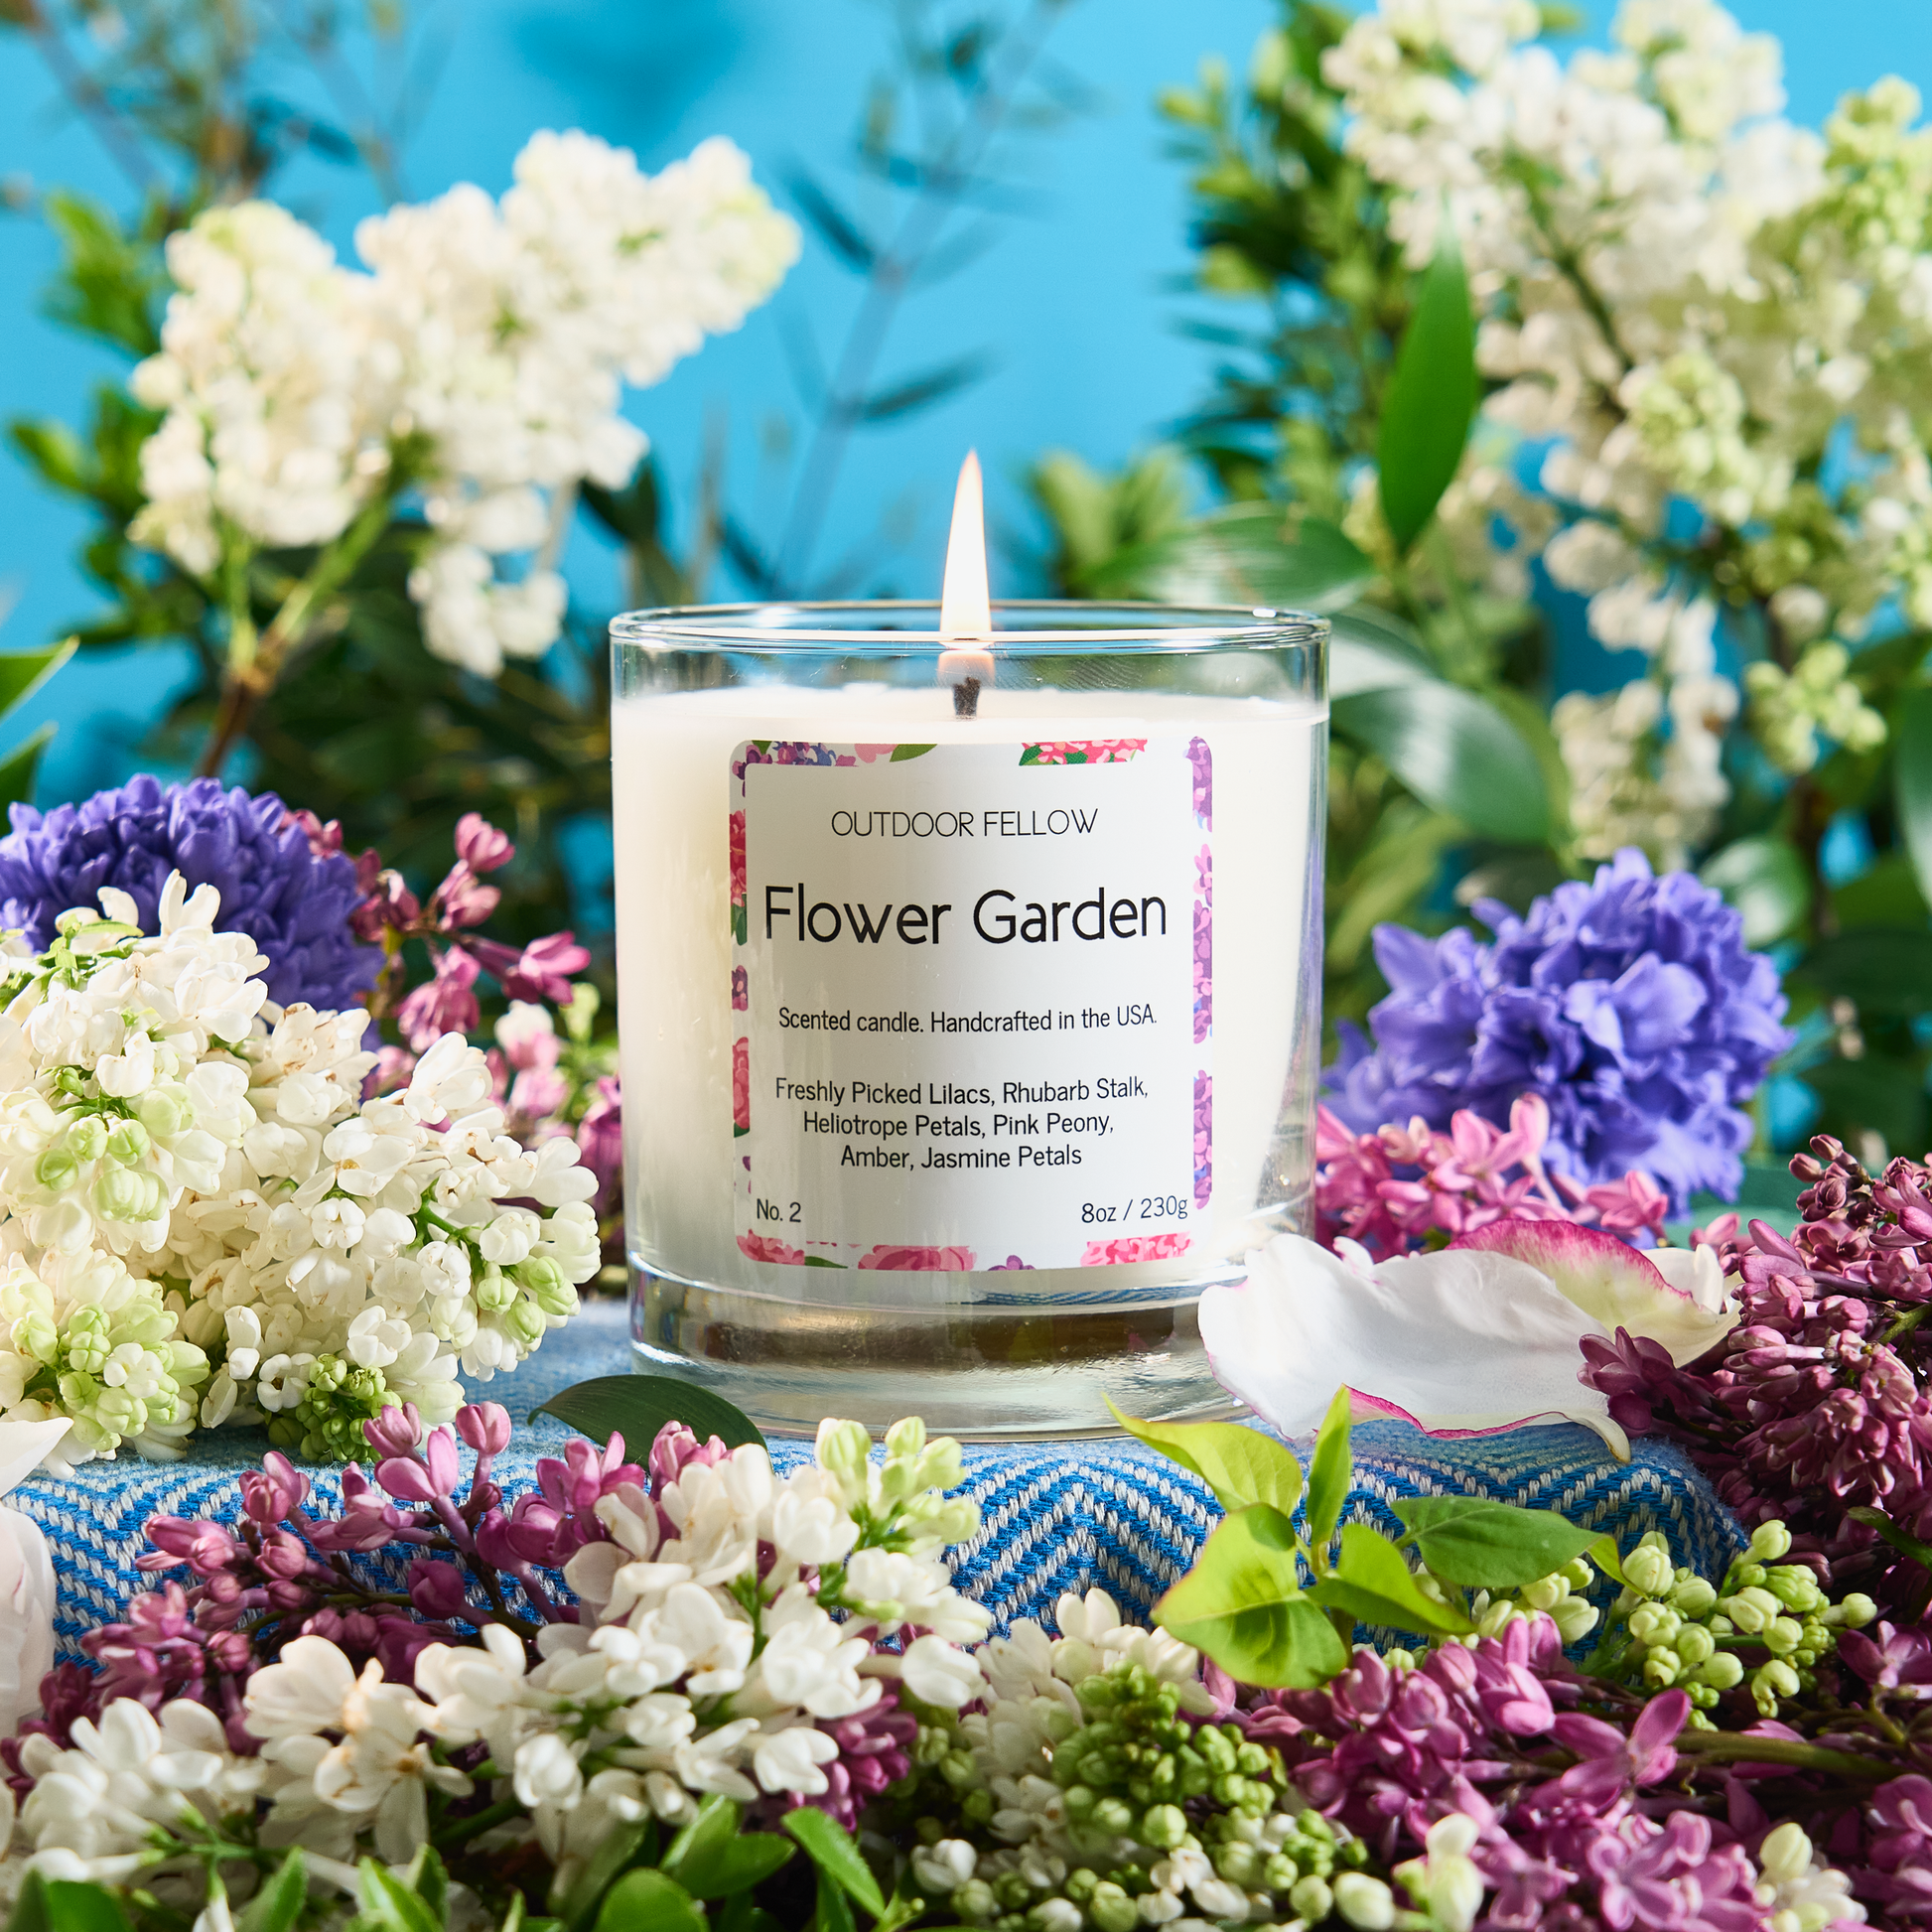 Flower Garden scented candle surrounded by lilac flowers